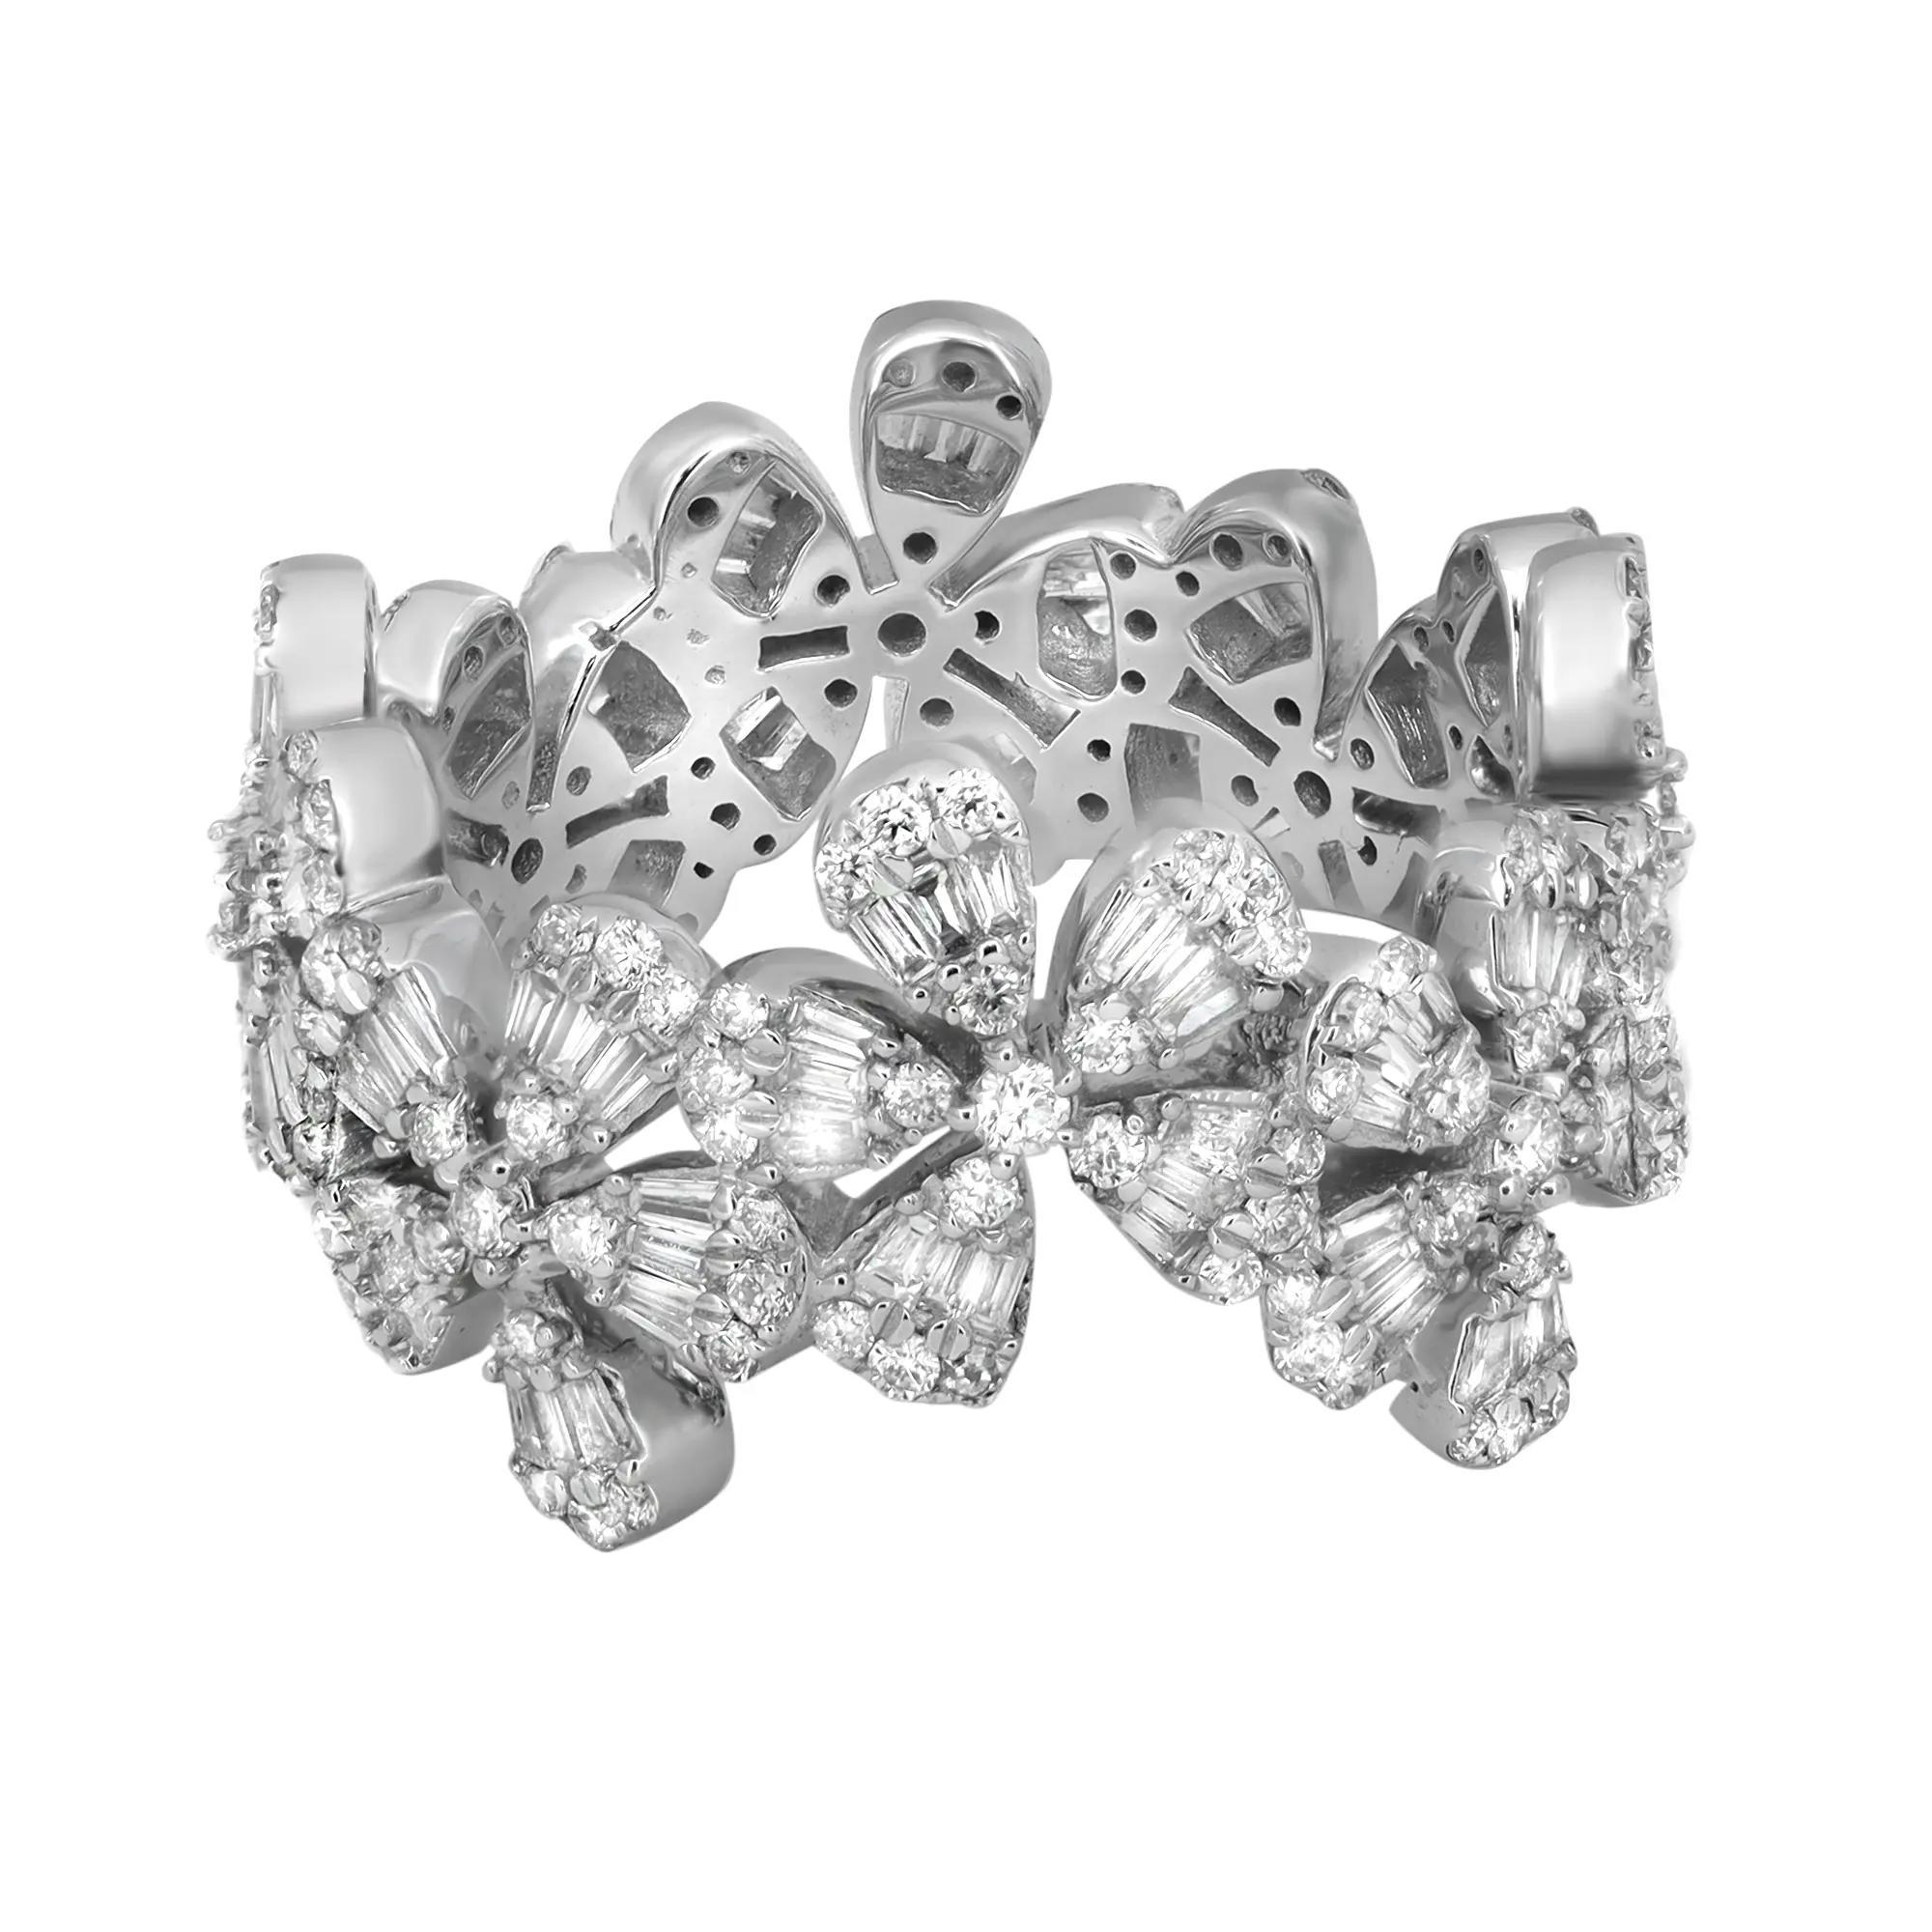 This beautiful multi flower diamond weddind band ring features channel set baguette cut and pave set round cut sparkling diamonds studded in multi flower design band ring. Crafted in 14k white gold. Total diamond weight: 1.57 carats. Diamond